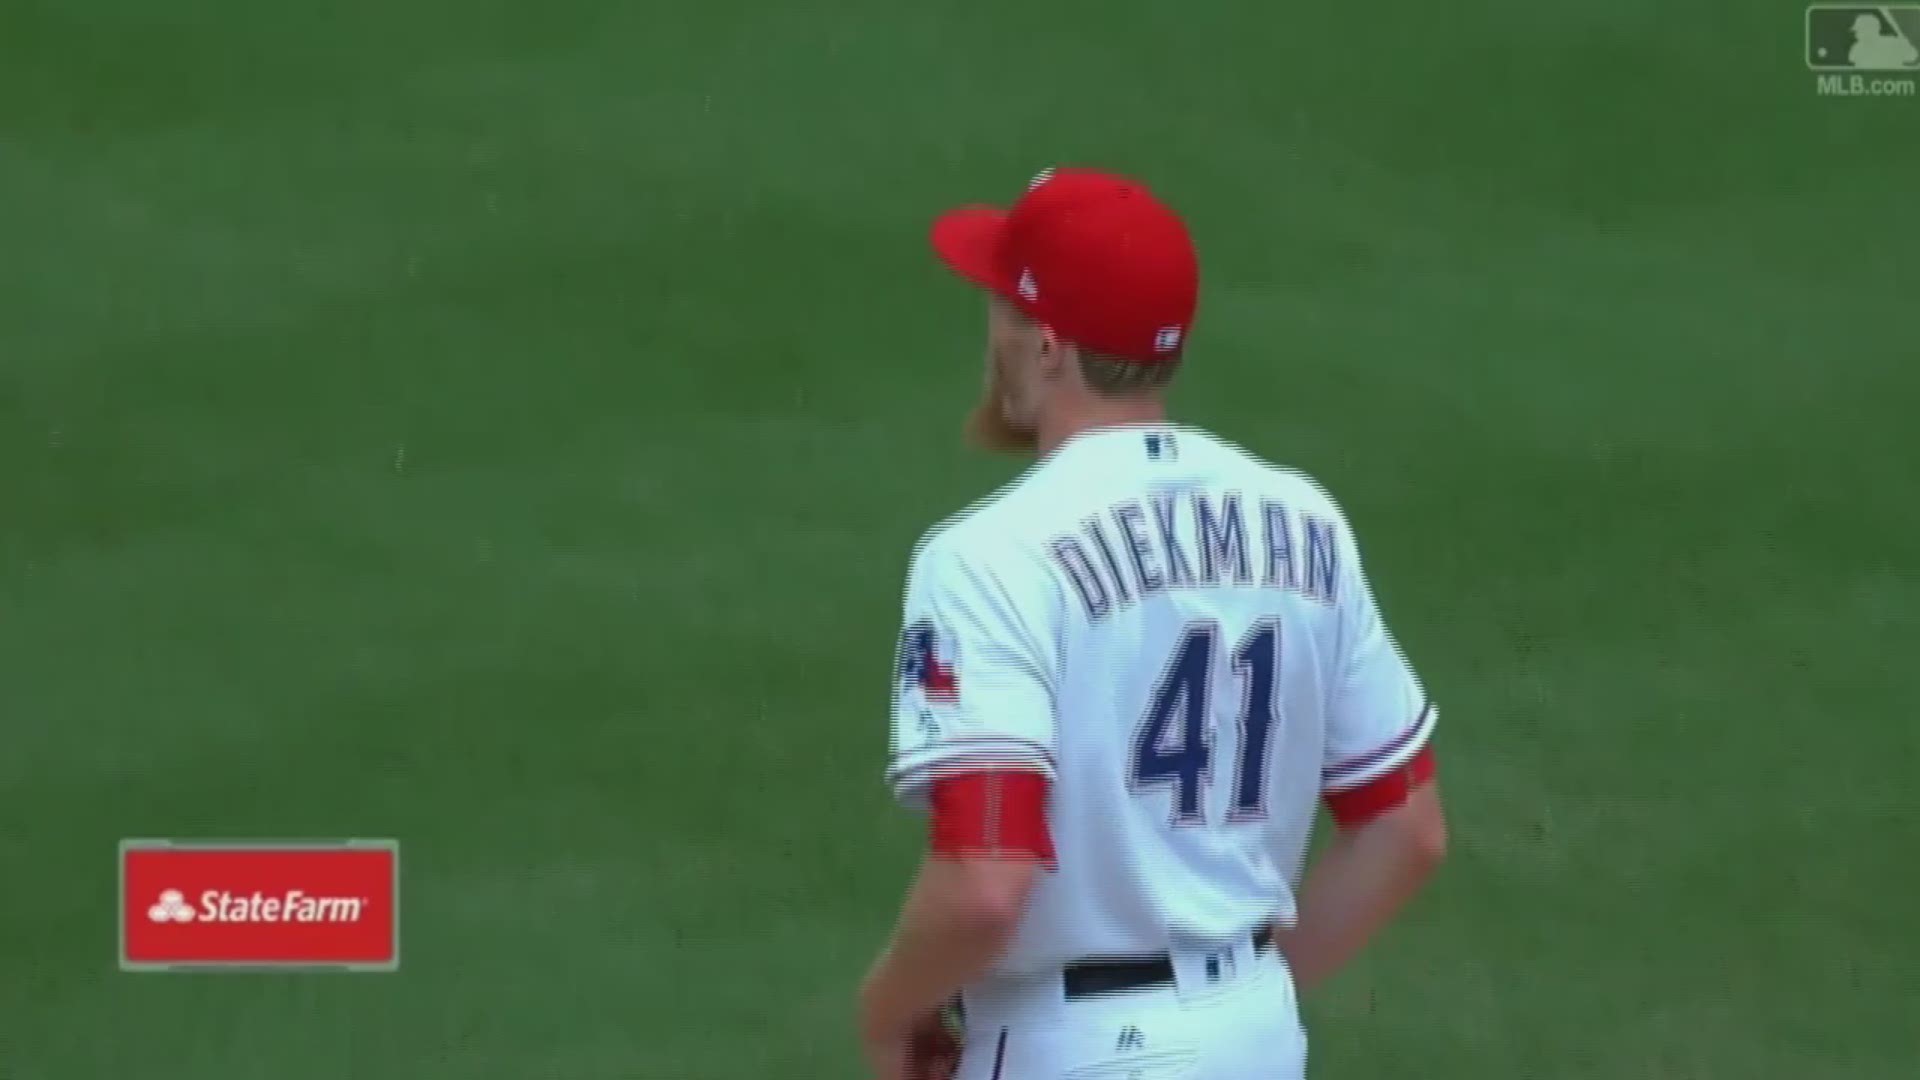 Rangers pitcher Jake Diekman is back from ulcerative colitis, and ready to go for the 2018 season